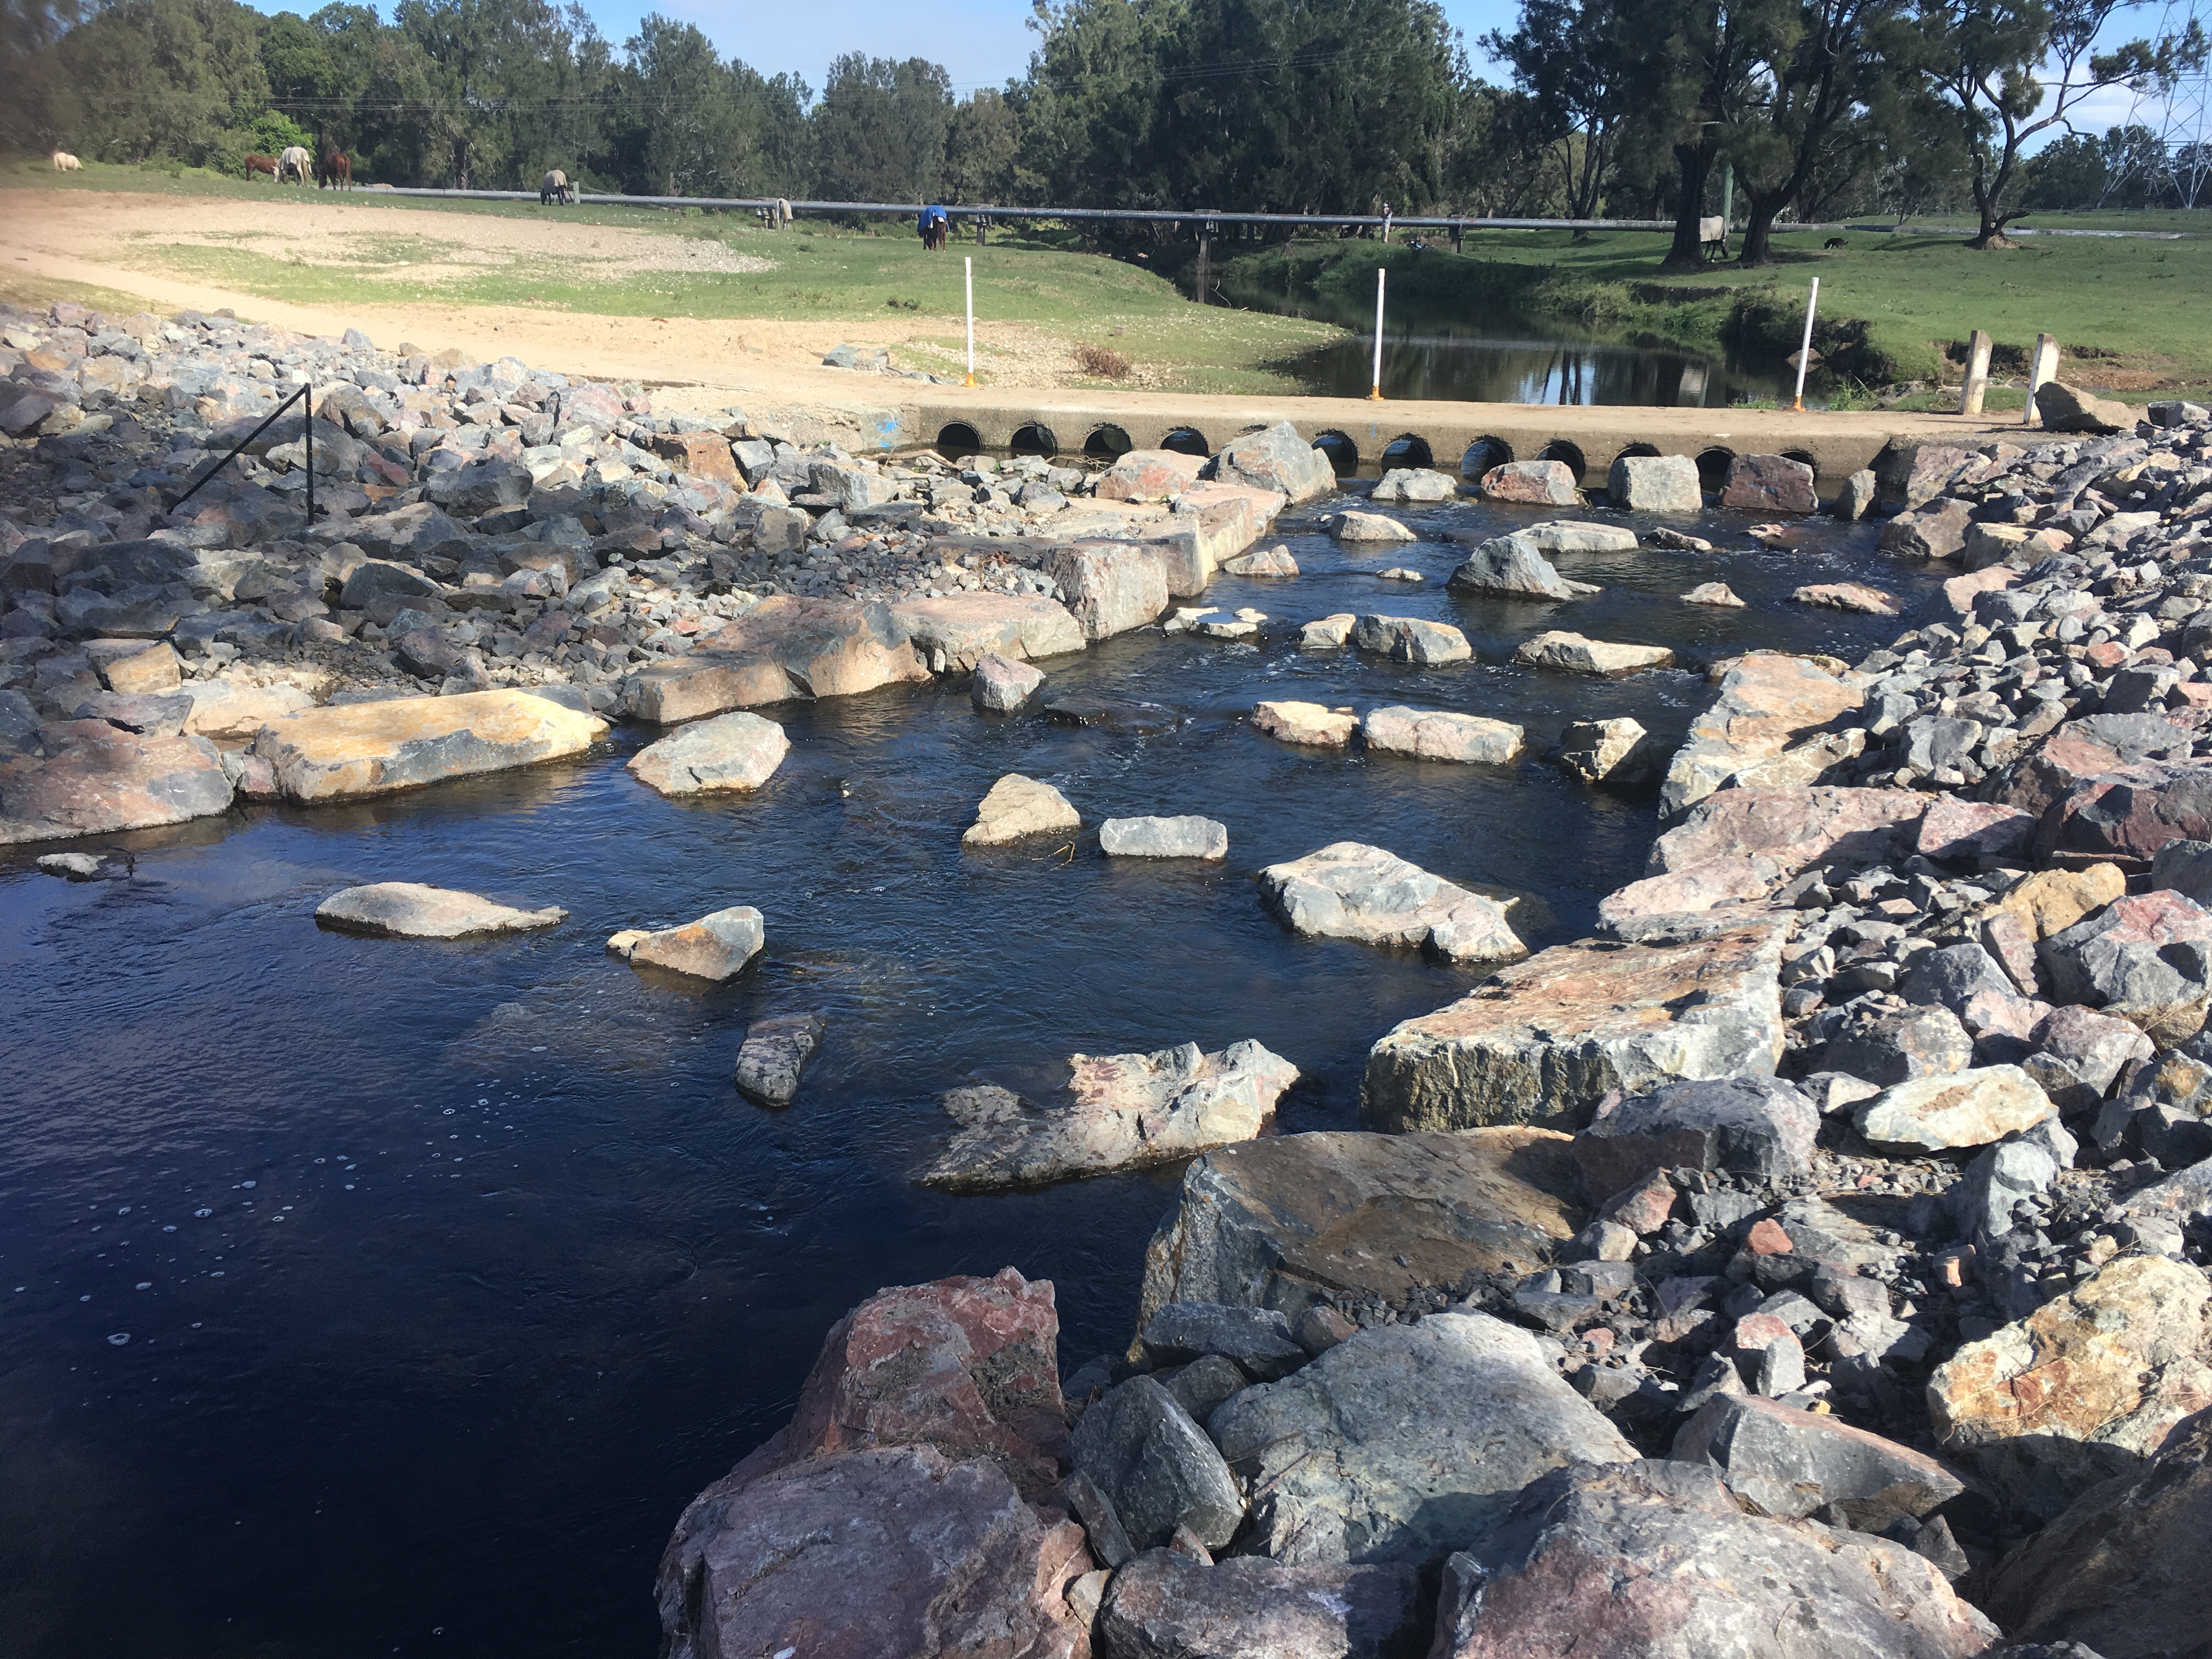 Full width rock ramp fishway designed to remediate water surface drop on downstream side of culvert apron and remediate velocity barrier within pipe culverts by increasing depth in culverts (Leitchs Crossing, South Pine River, Queensland) Photo by Matthew Moore